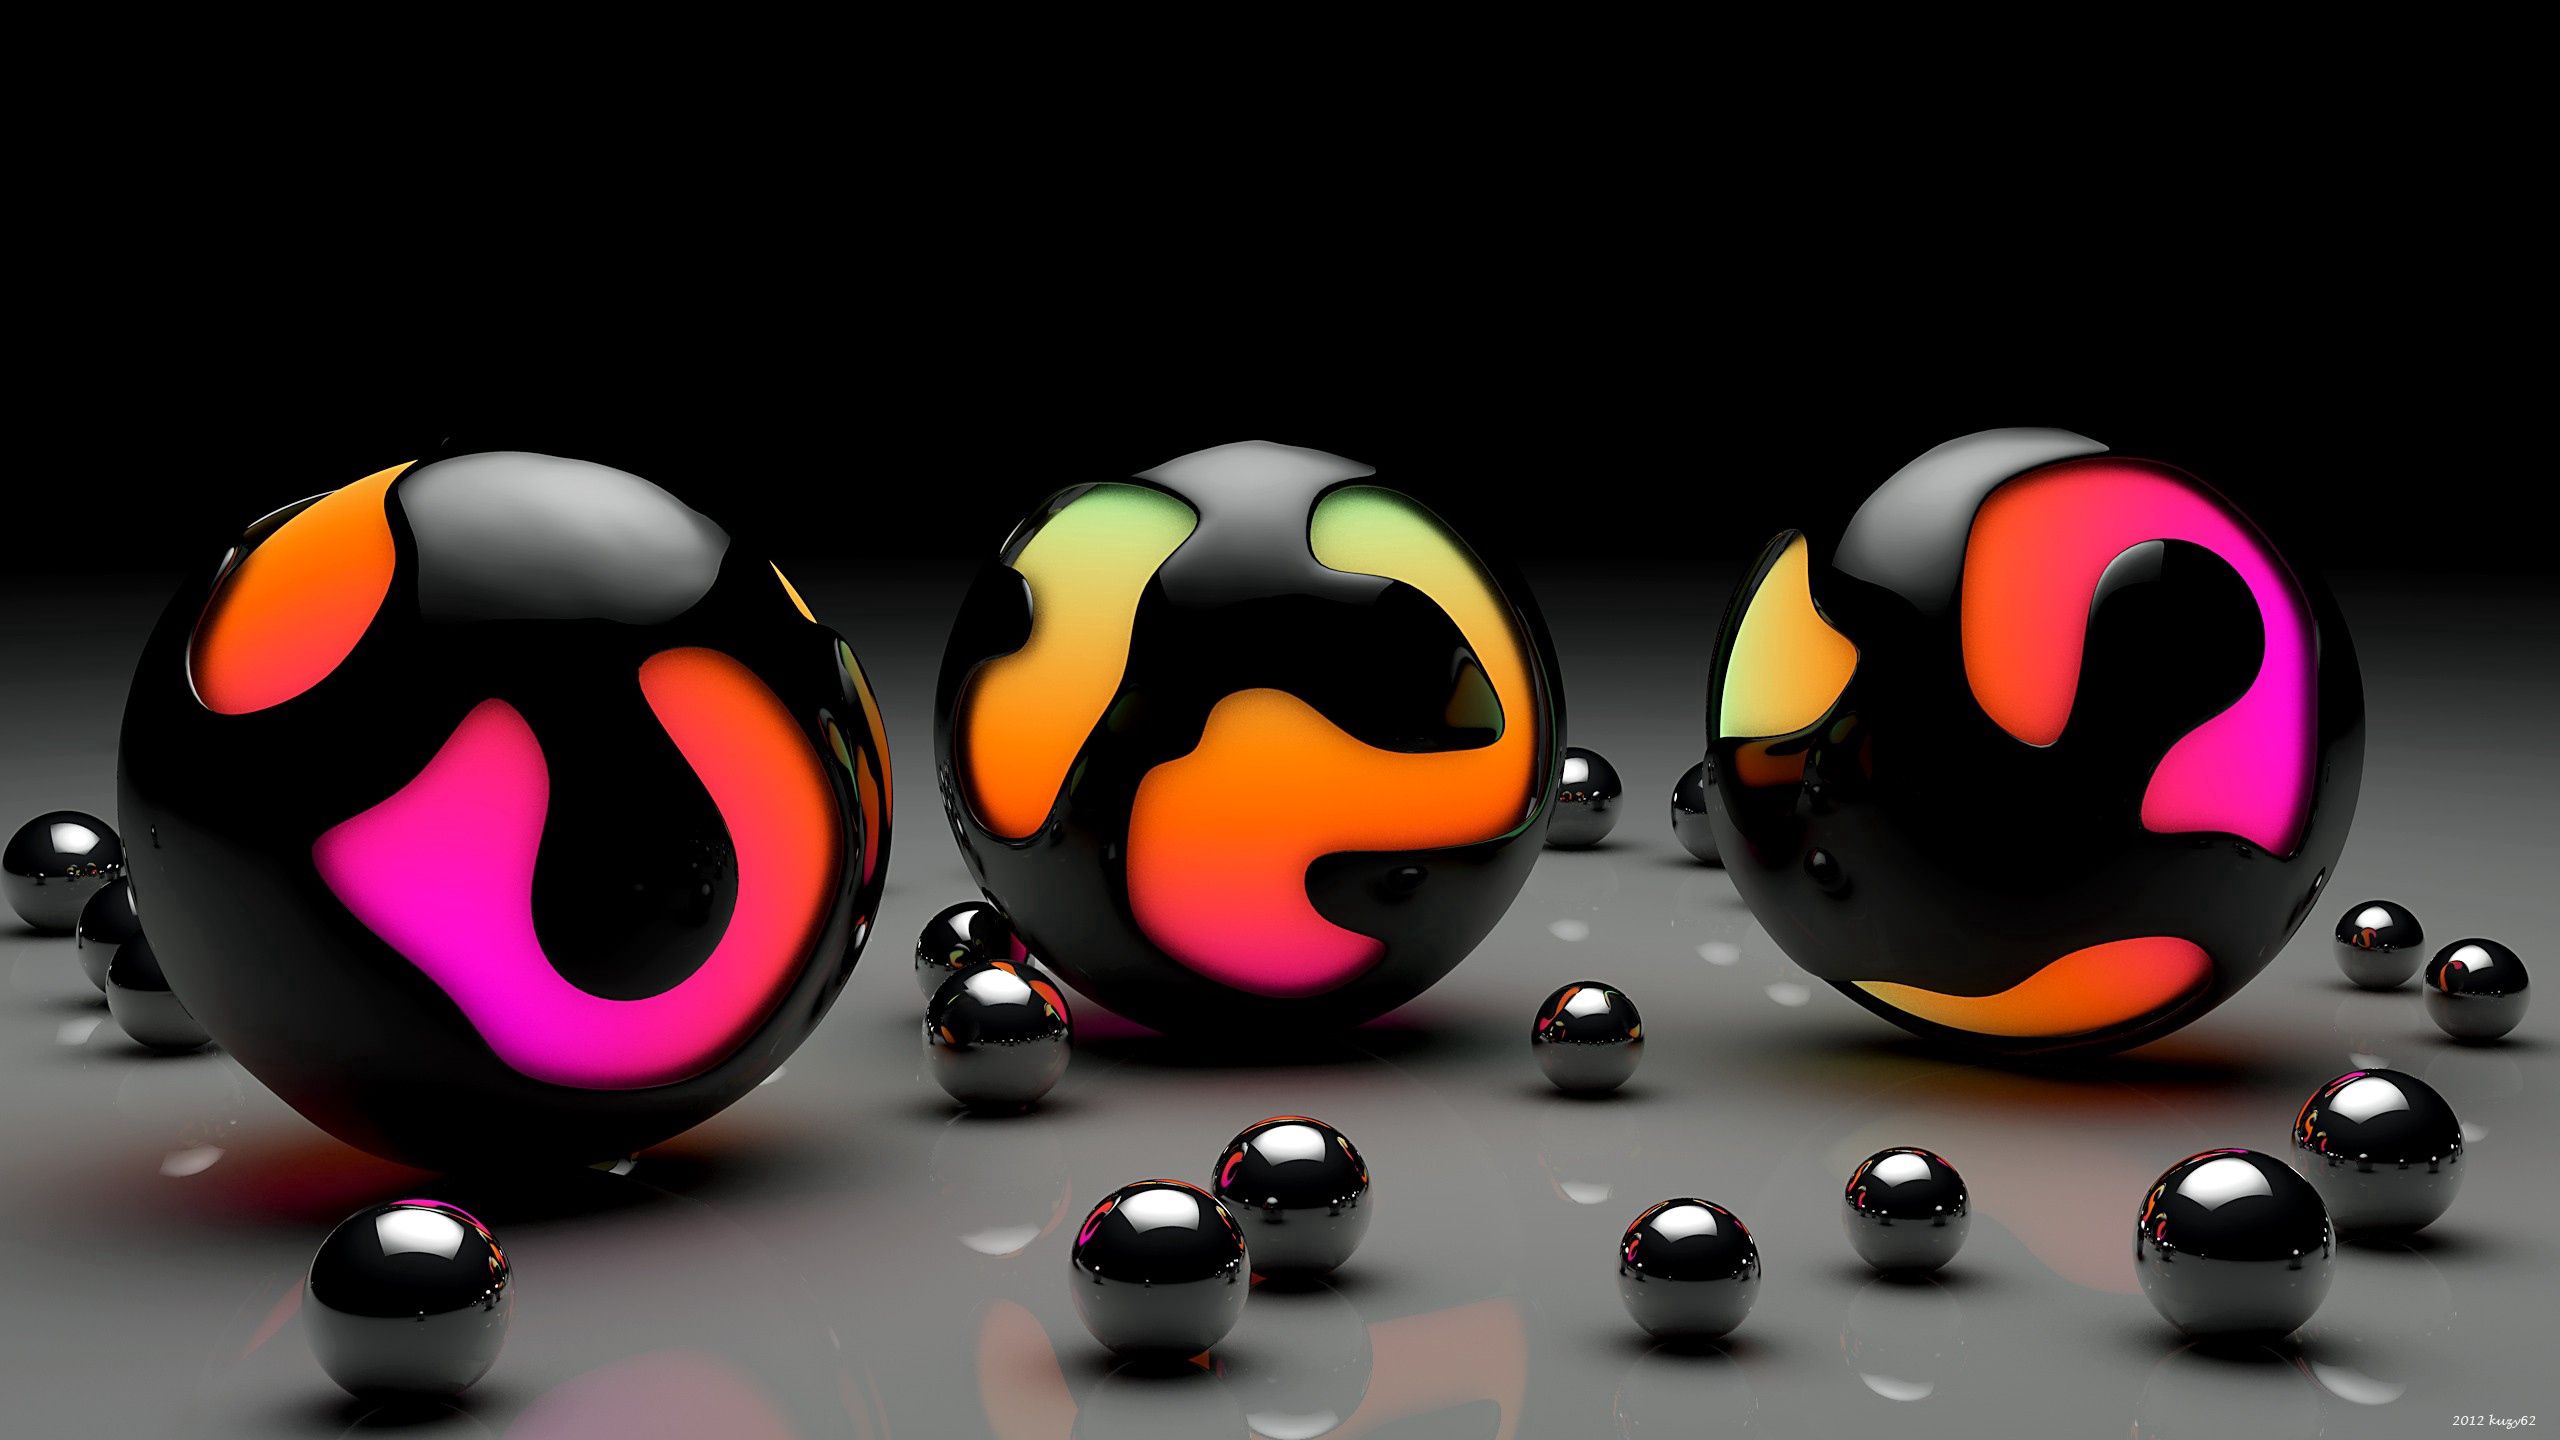 Free HD light, dimension, 3d, balls, surface, shine, dimensions (edit), lots of, multitude